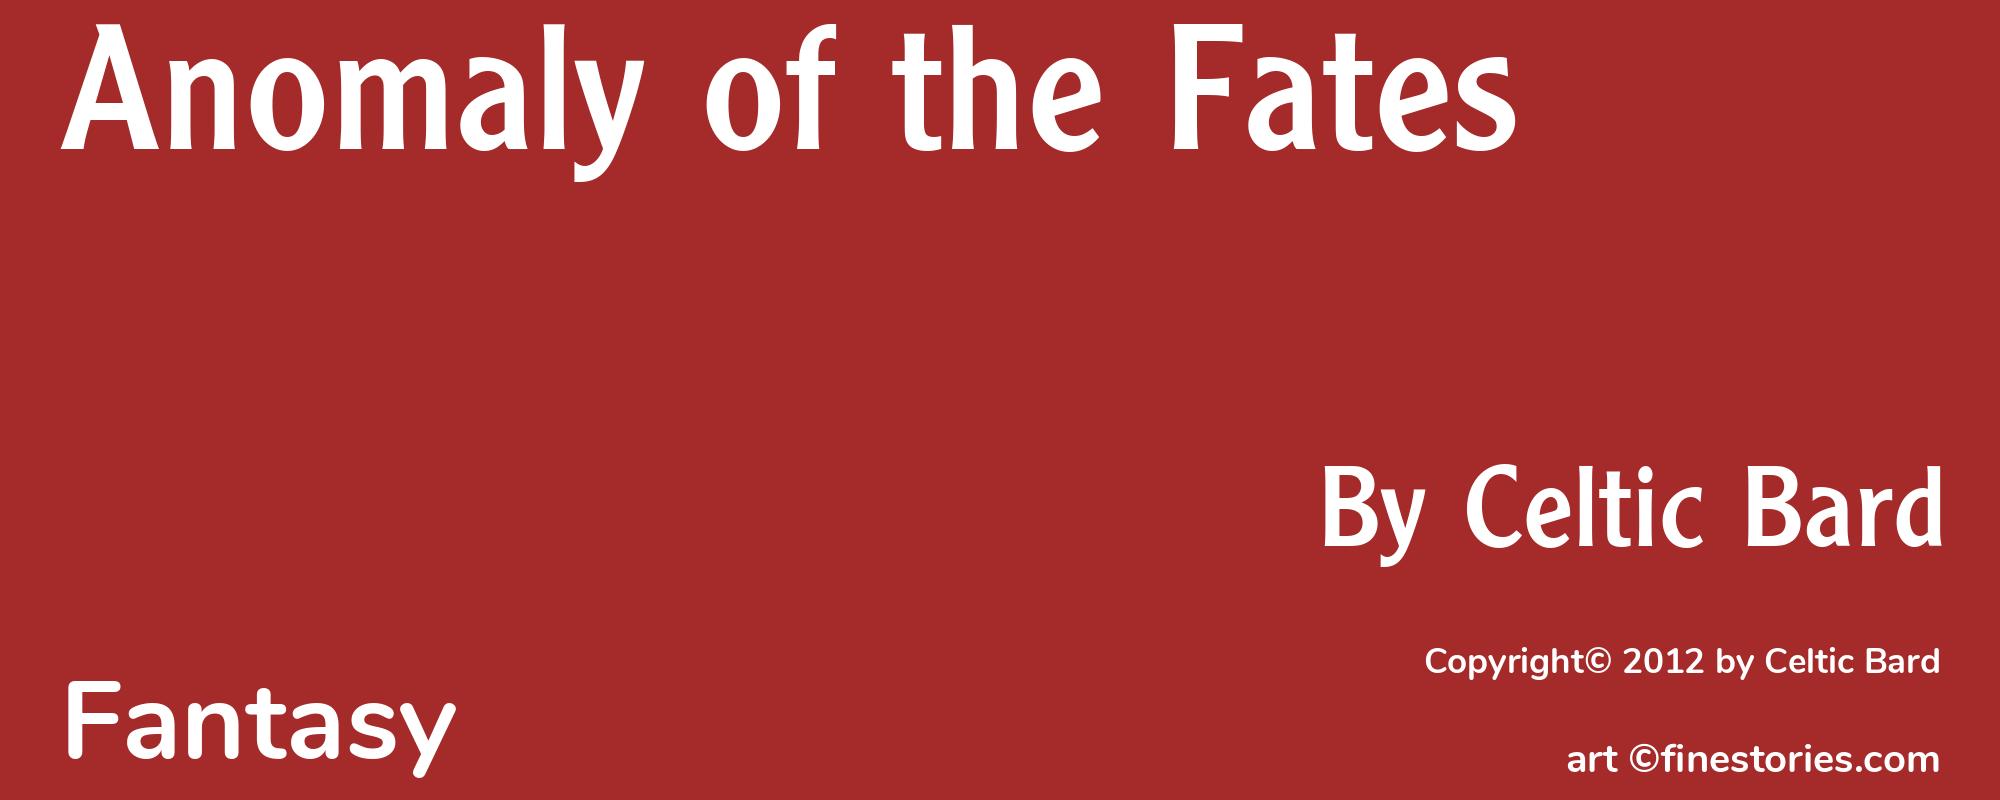 Anomaly of the Fates - Cover